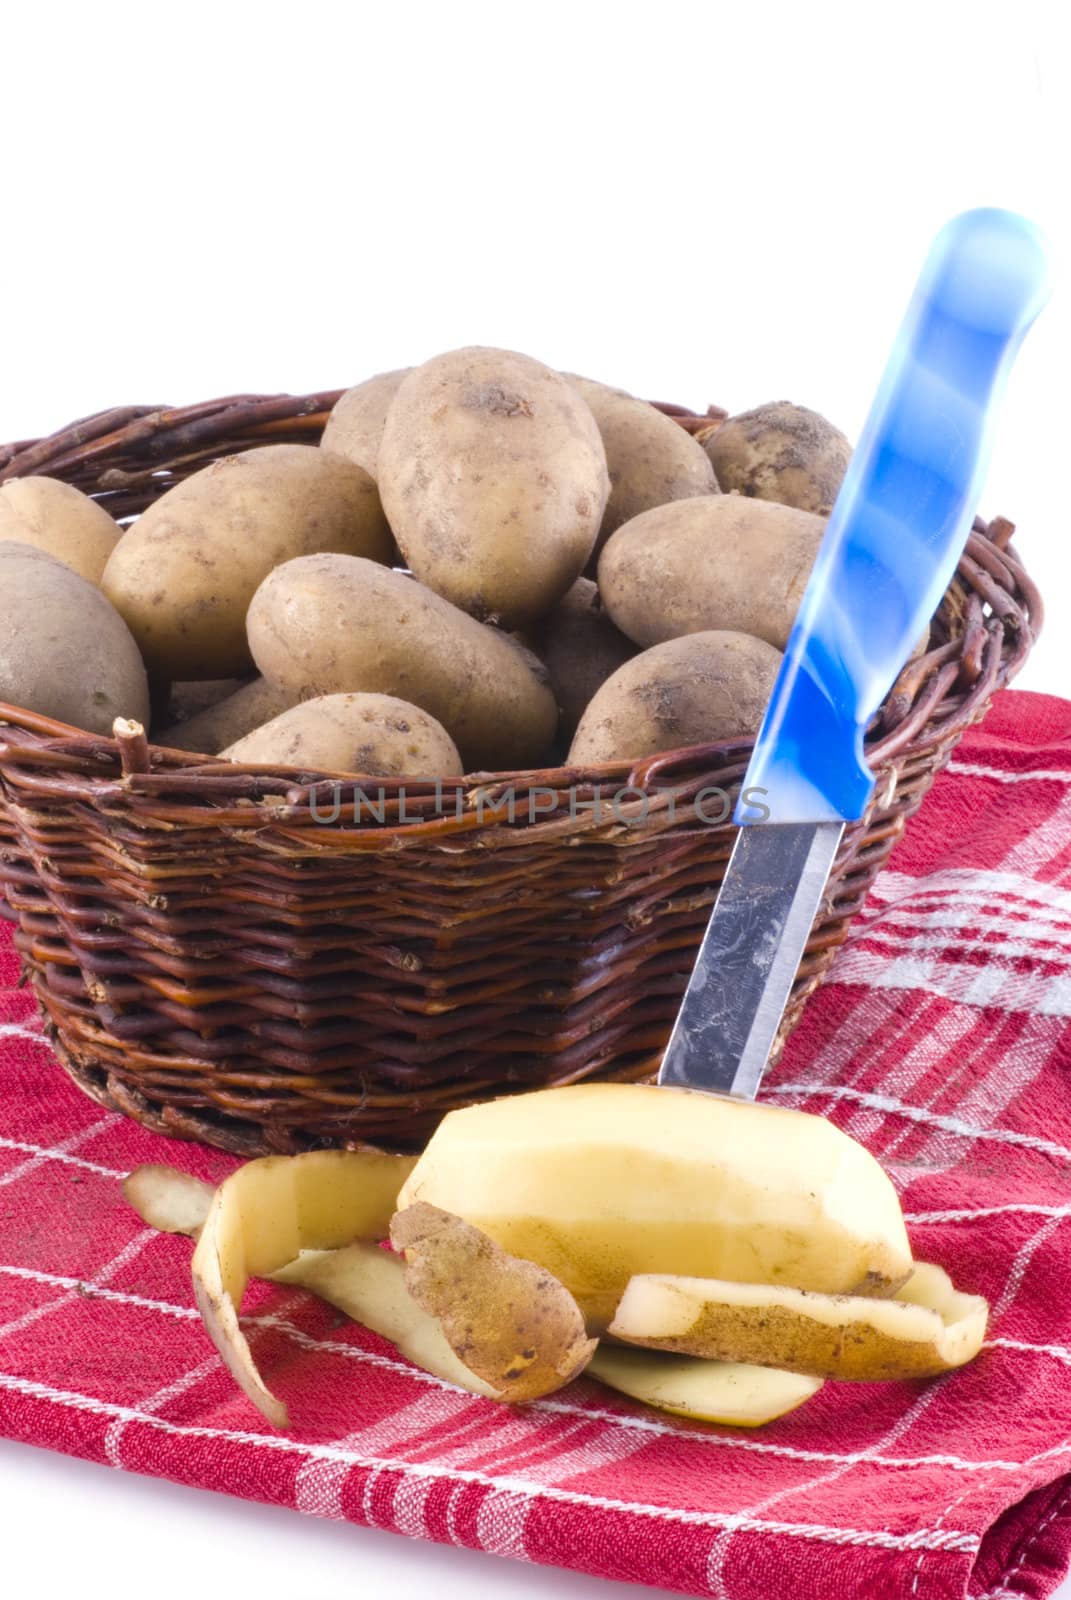 Basket with potatoes standing on red cloth, isolated on white.